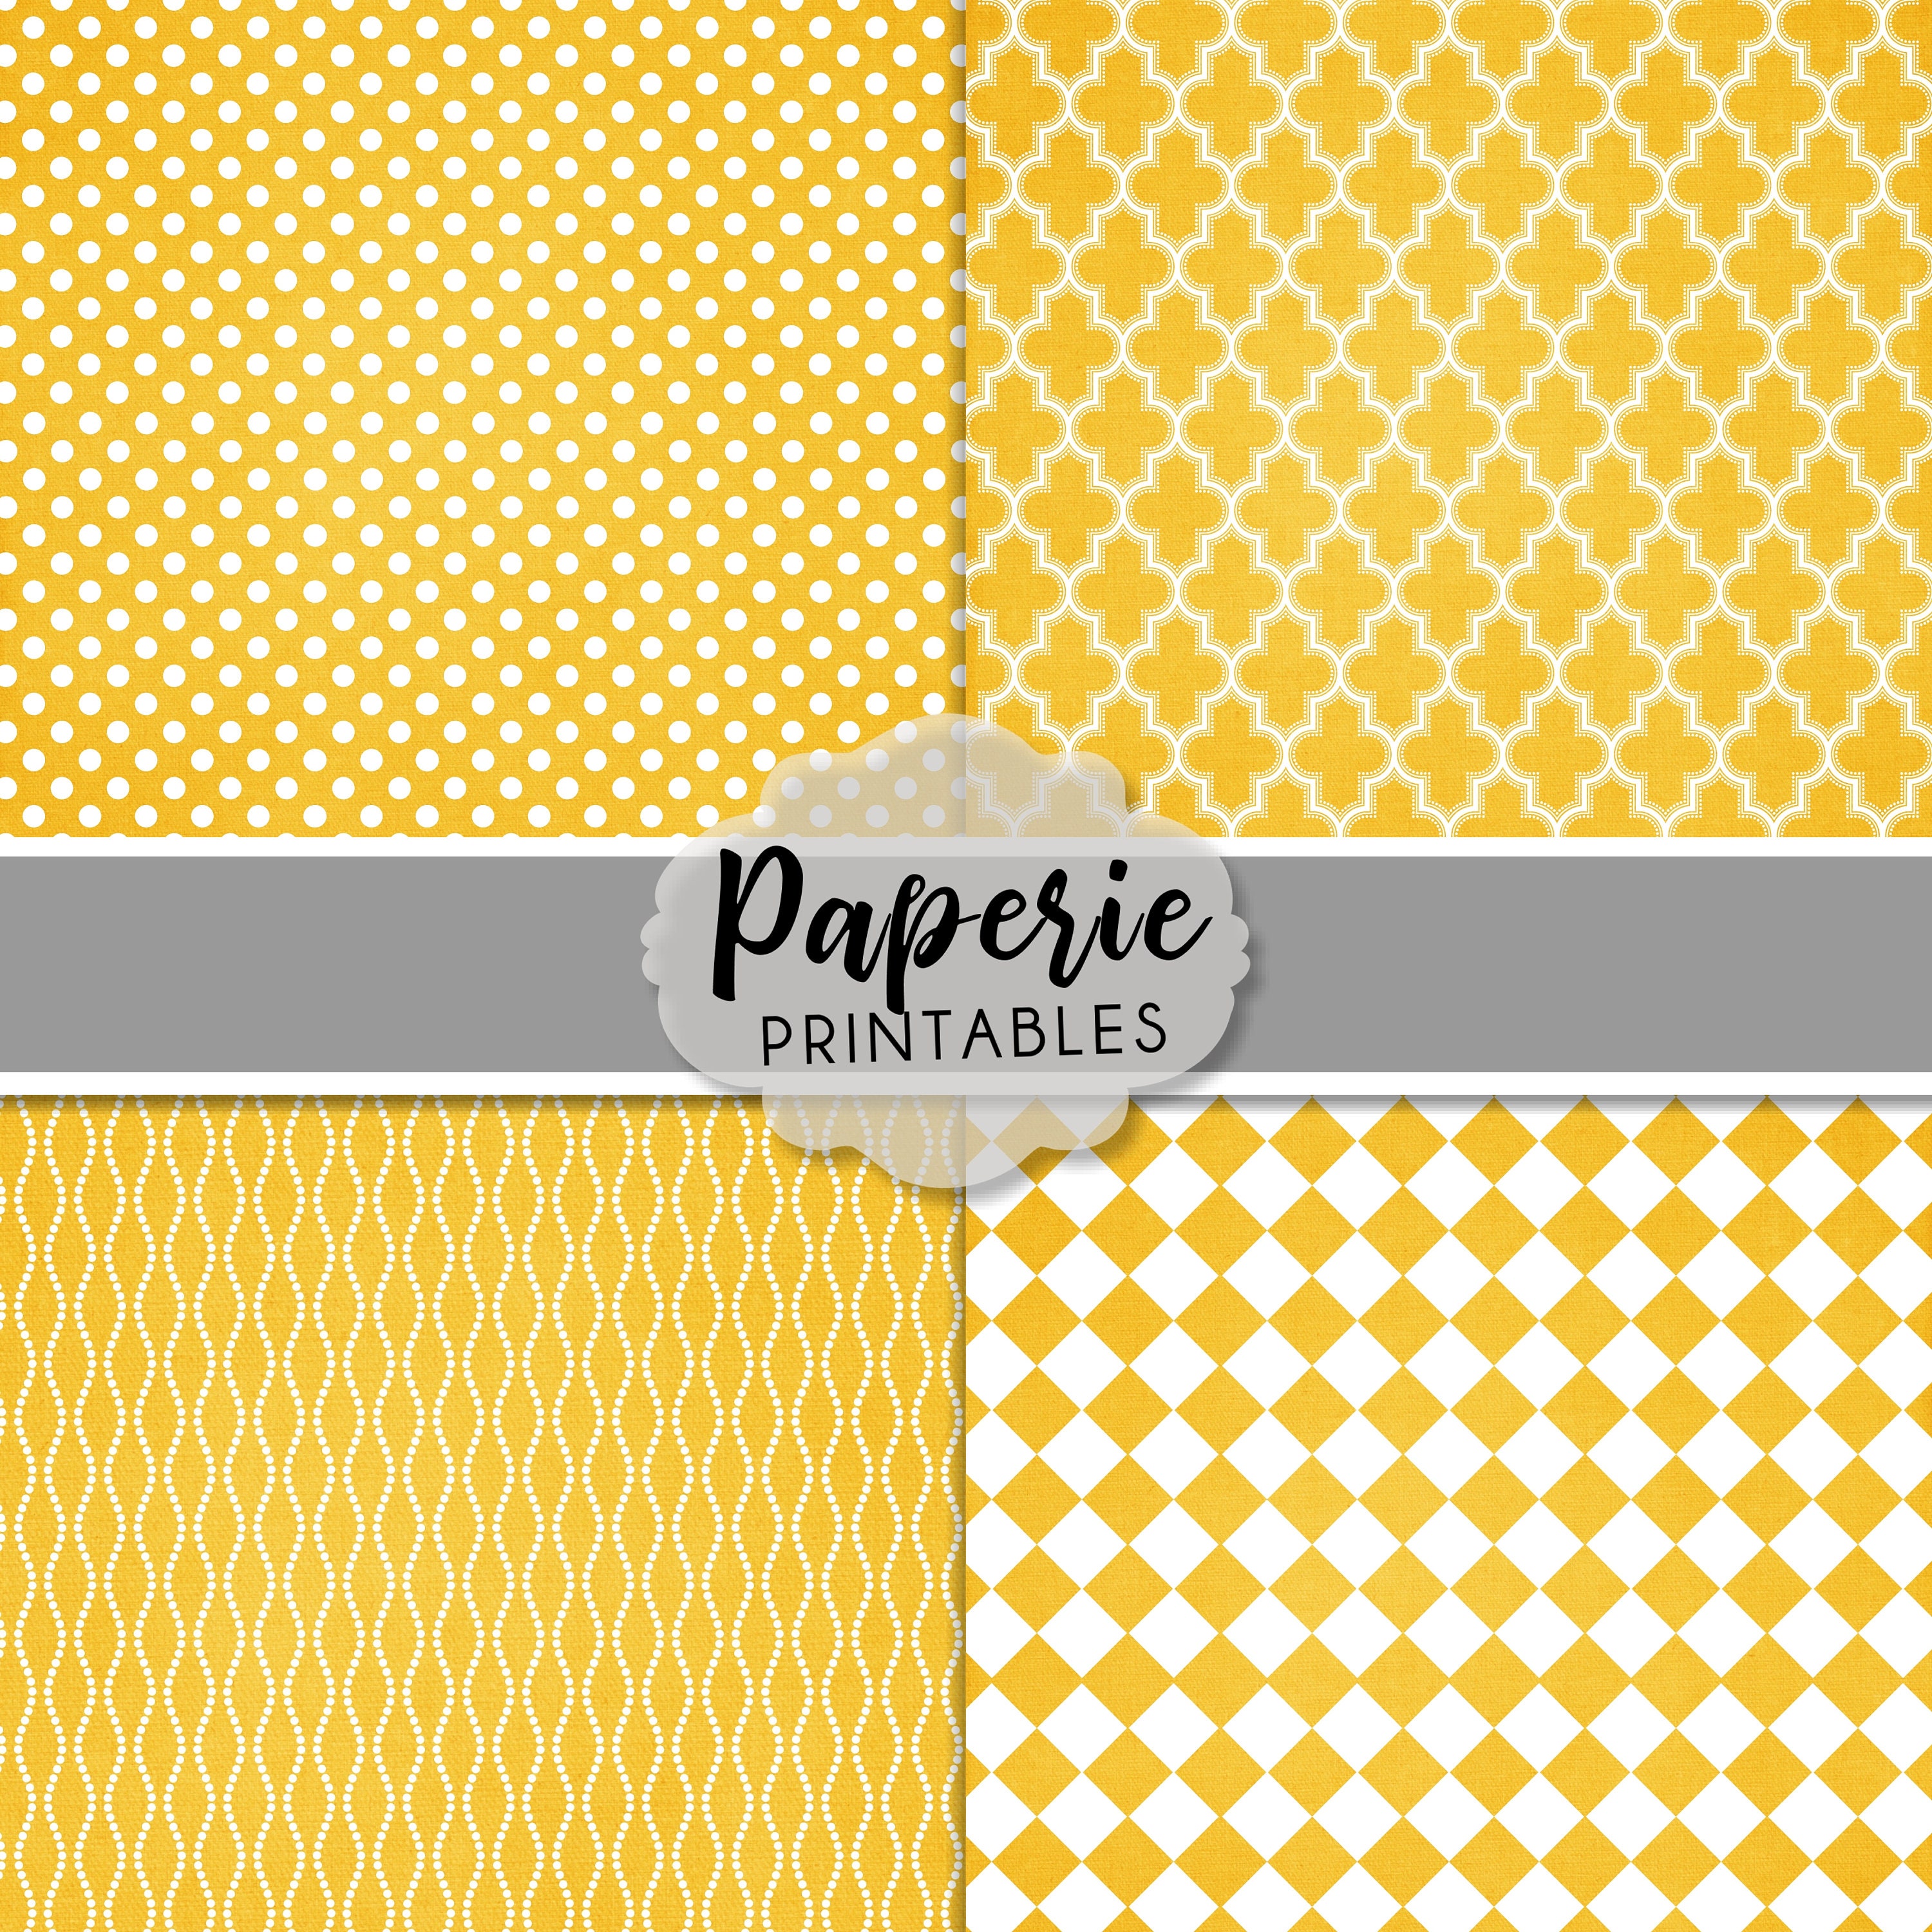 Yellow Scrapbook Paper - Yellow & White Digital Papers For Wedding